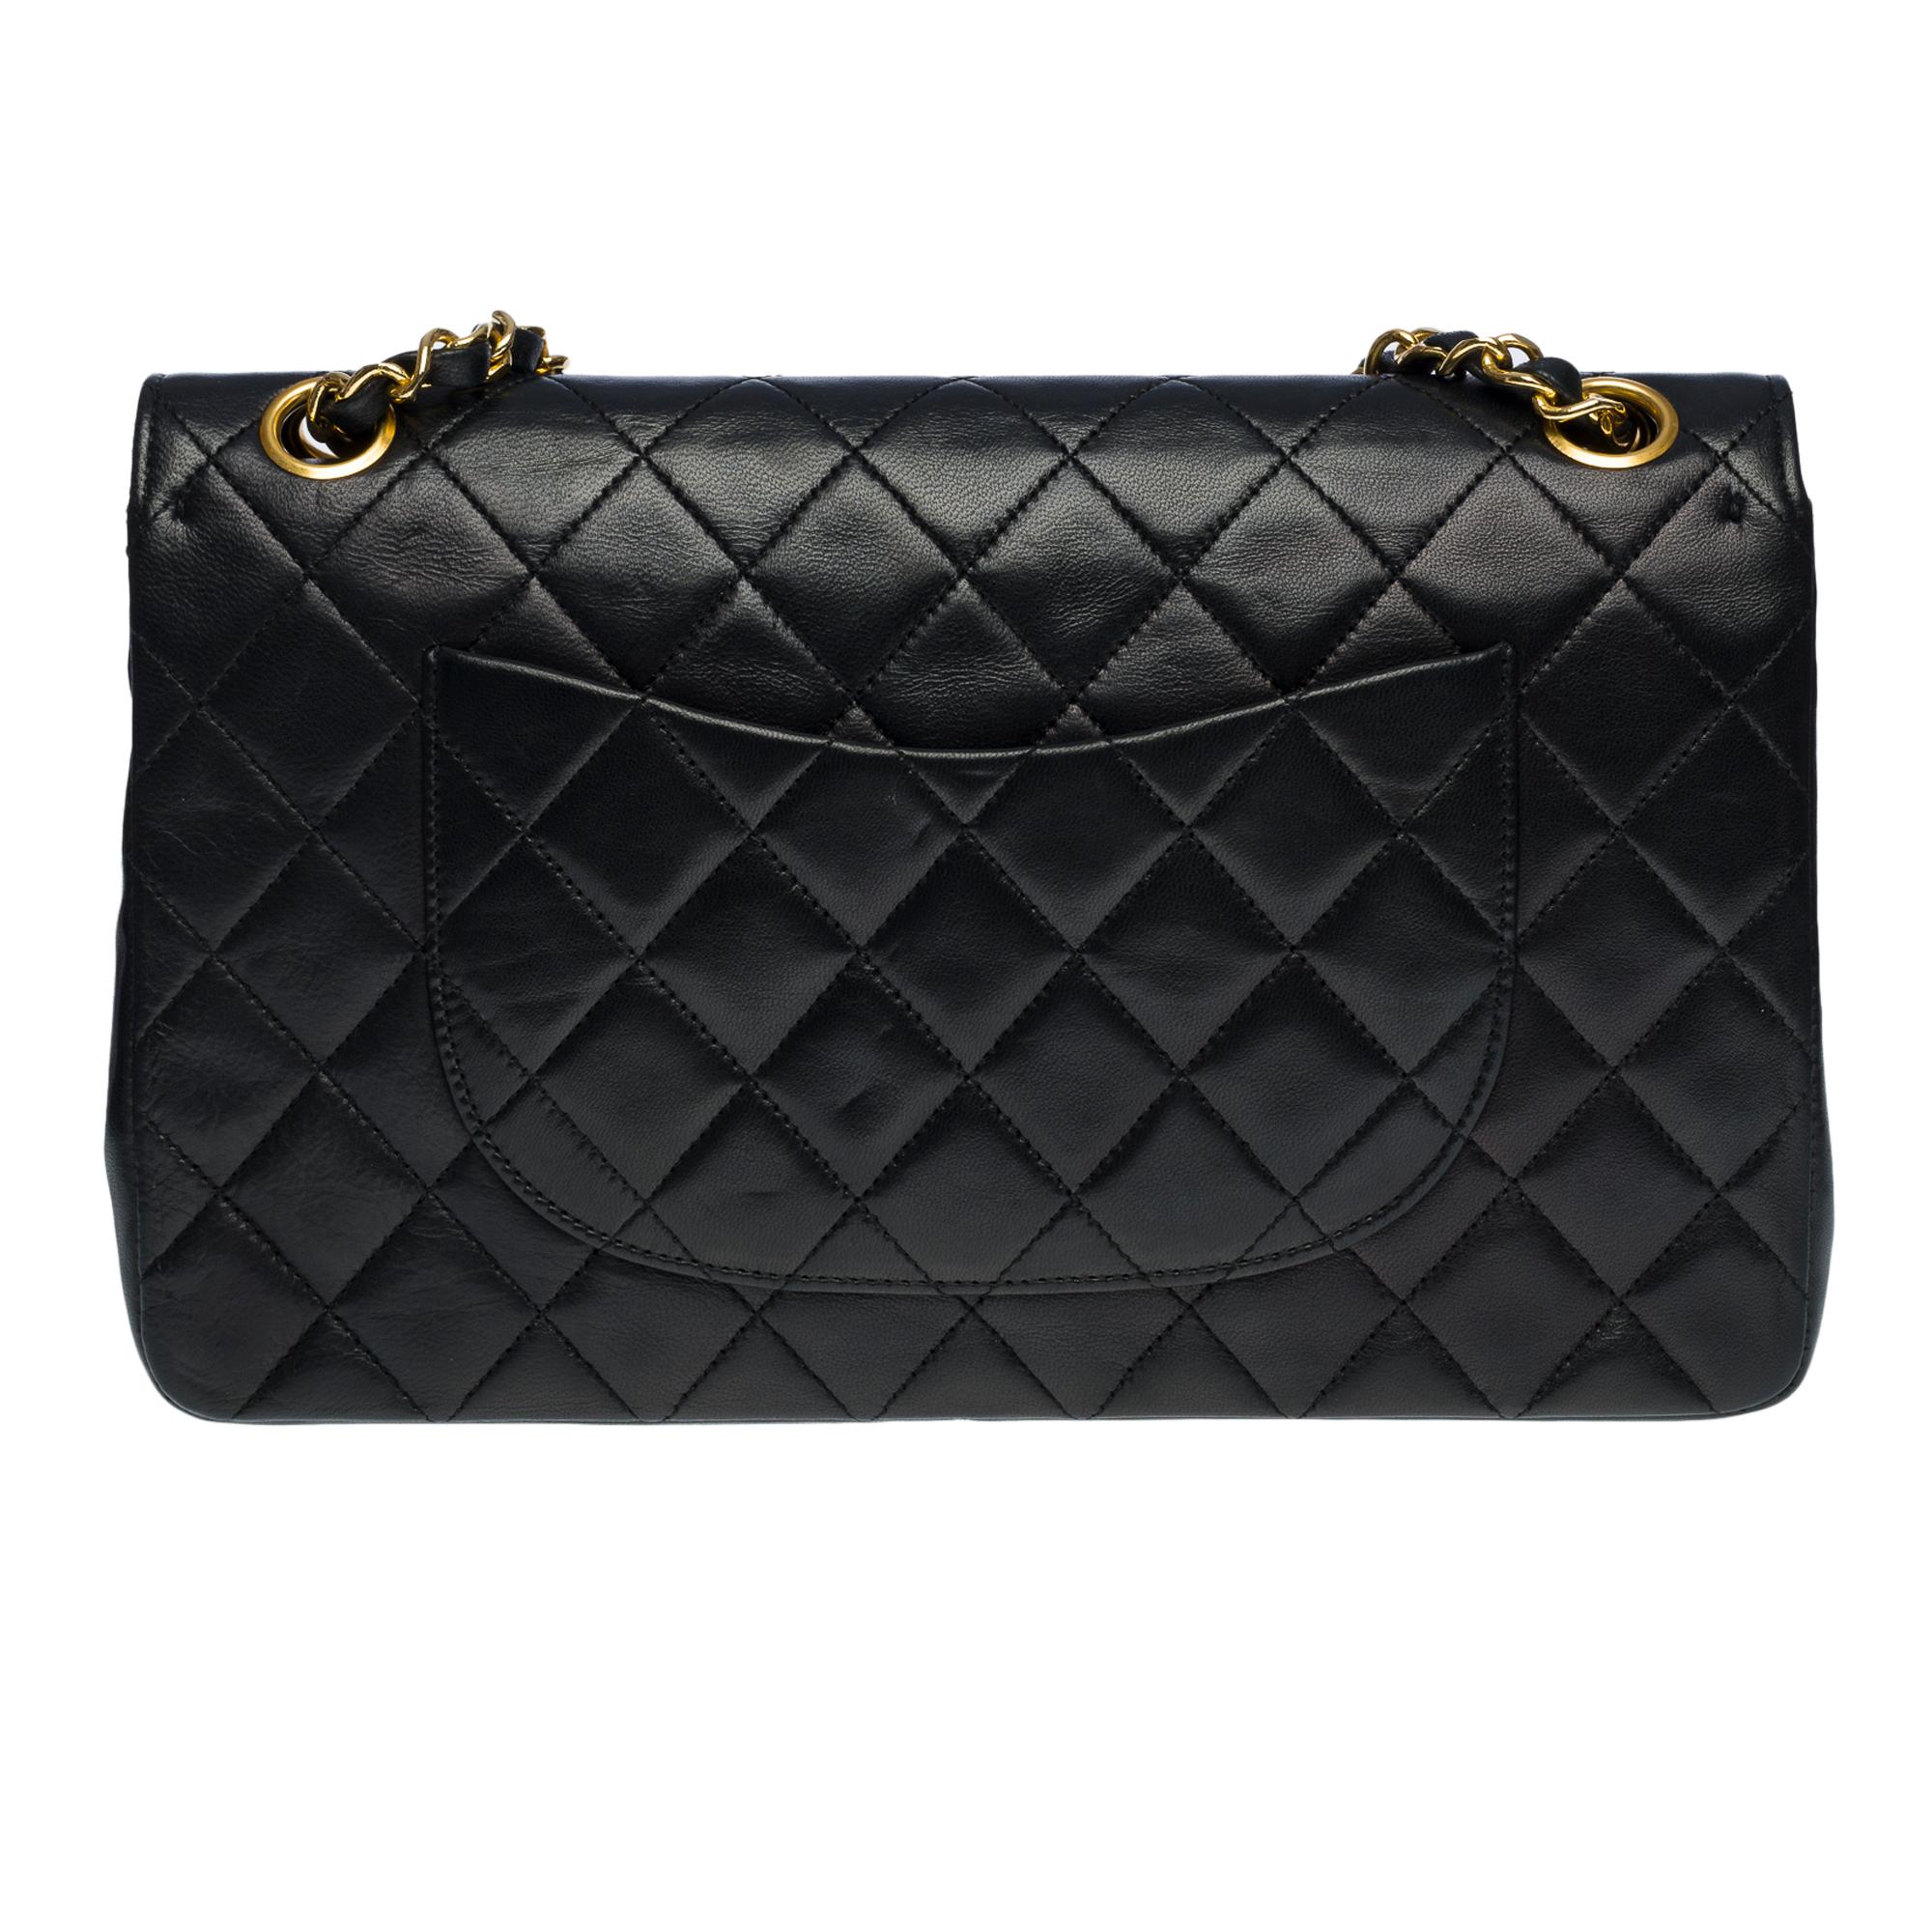 Exceptional Chanel Timeless Medium 25 cm double flap shoulder bag in black quilted lambskin, gold metal hardware, gold metal chain interwoven with black leather for a shoulder and shoulder strap 
 
Backpack pocket 
Flap closure, gold-tone CC clasp